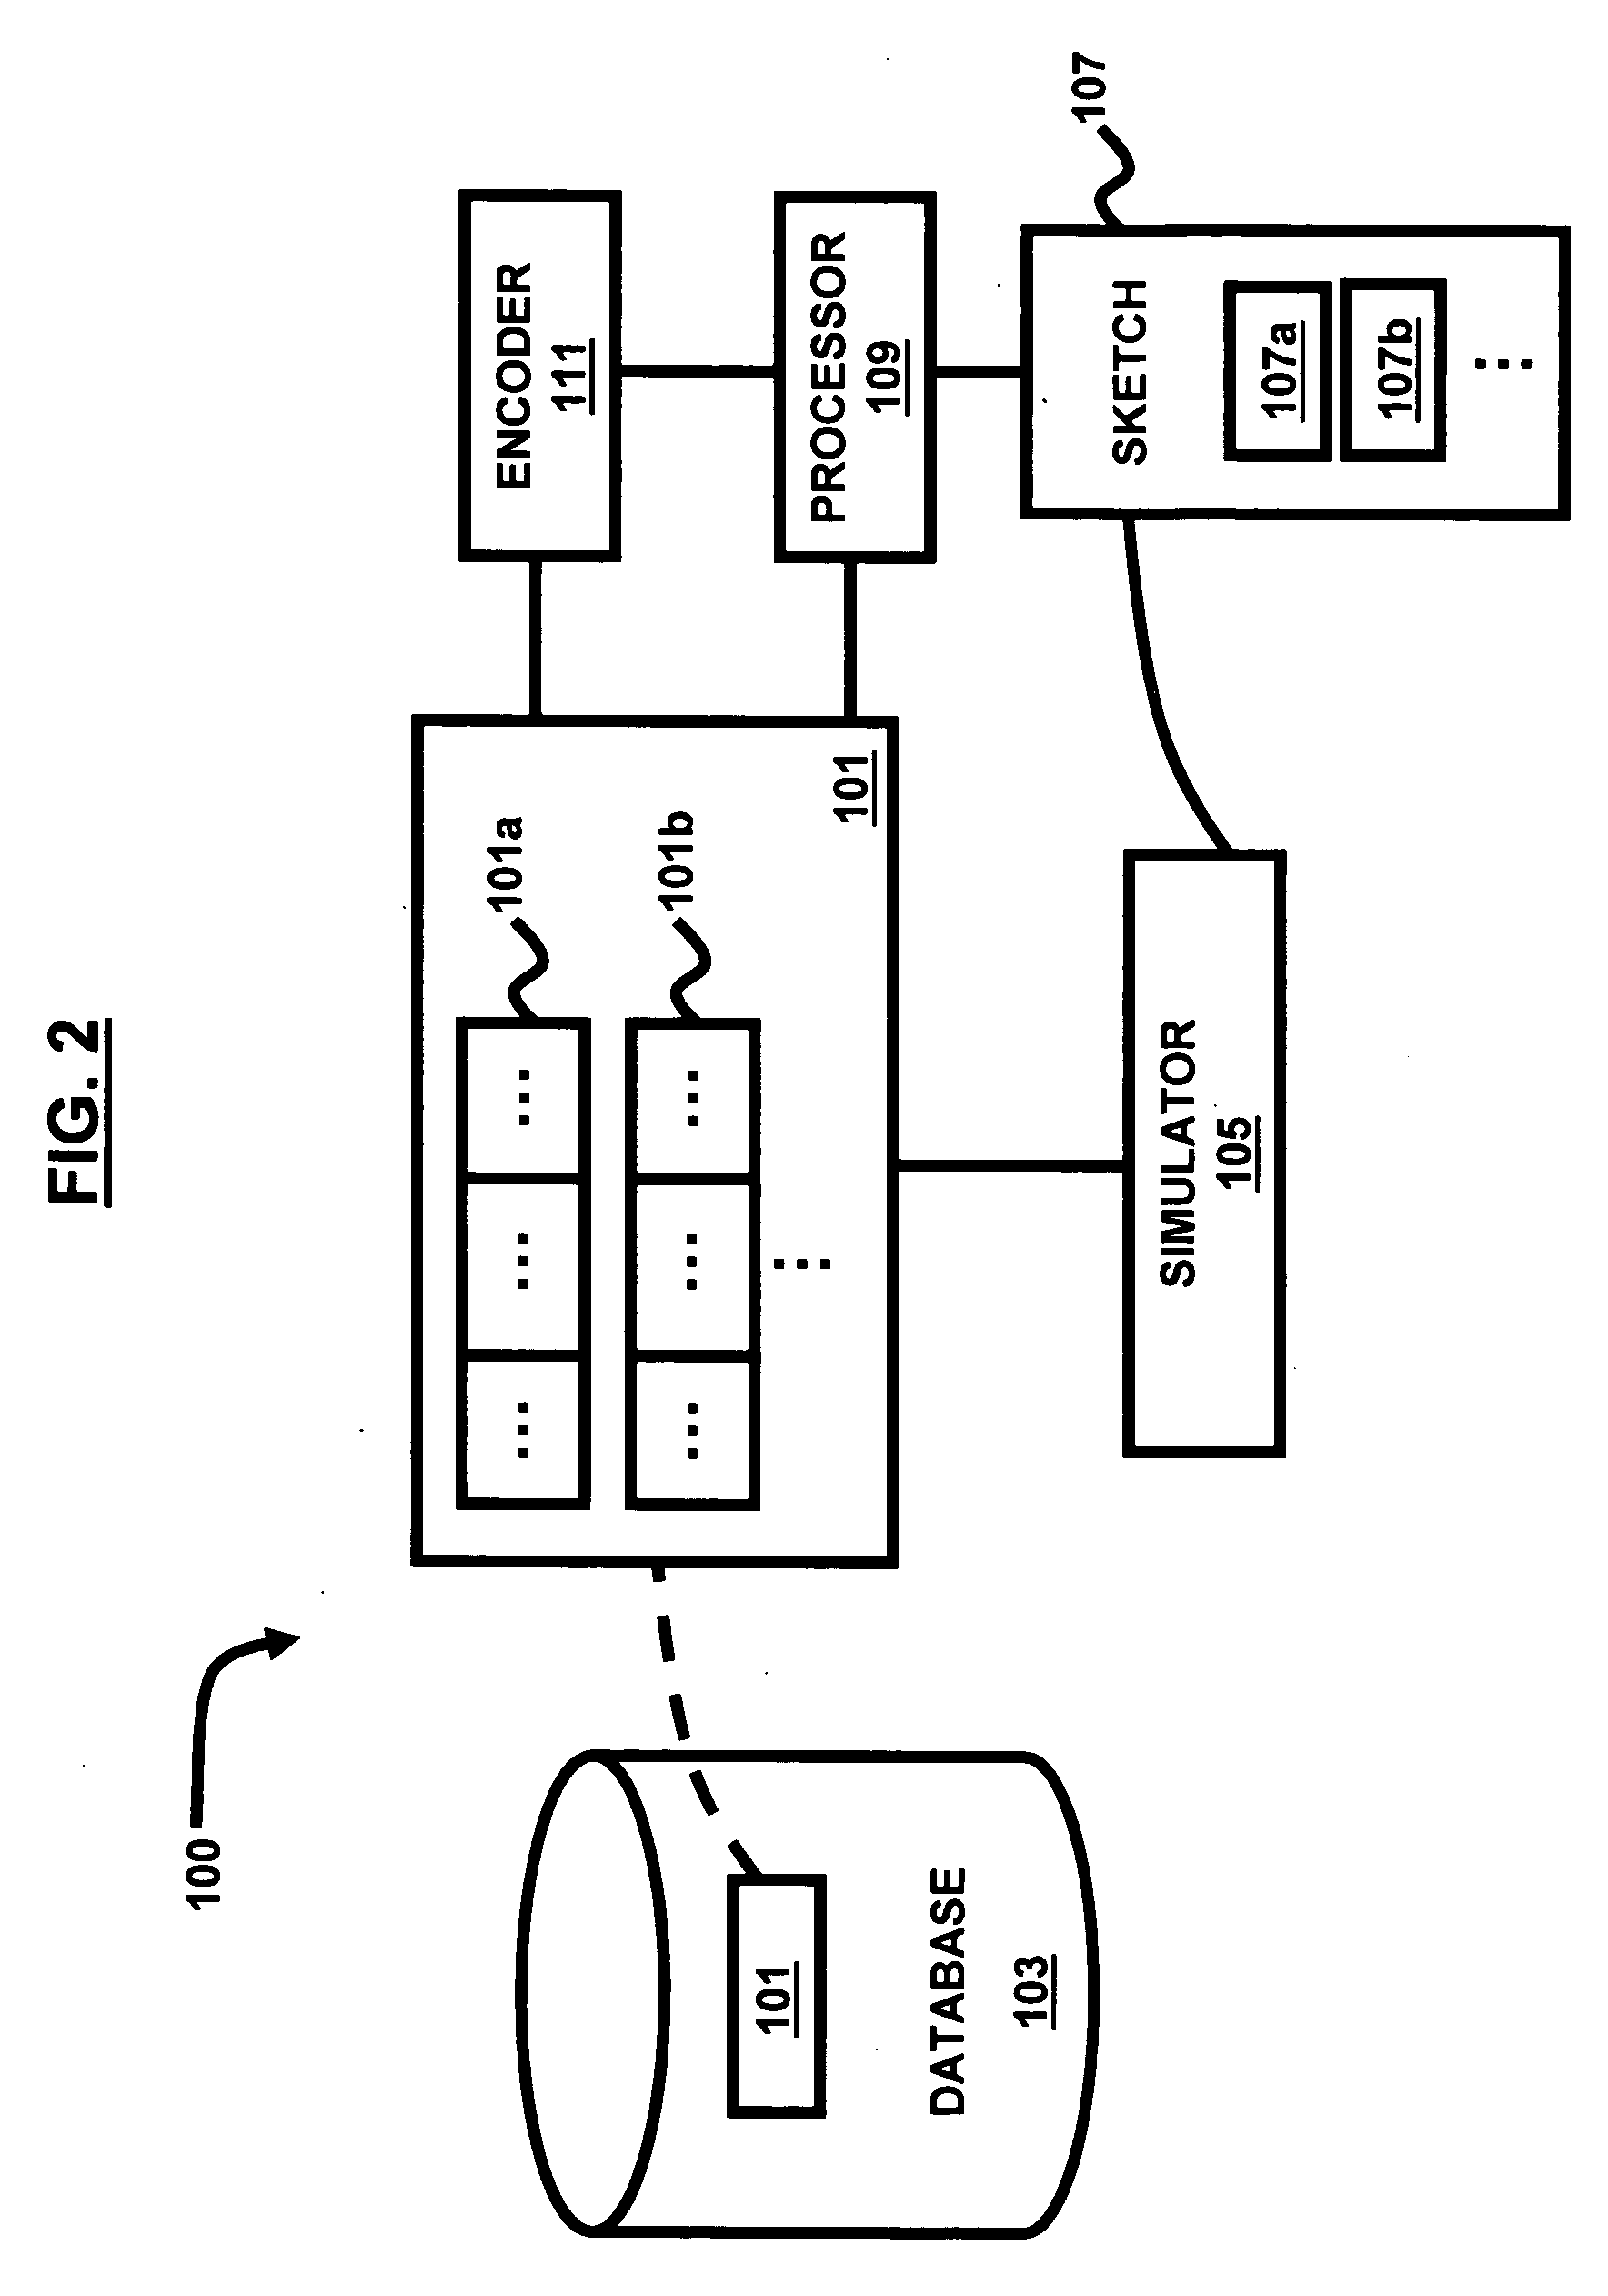 System and method for detecting matches of small edit distance